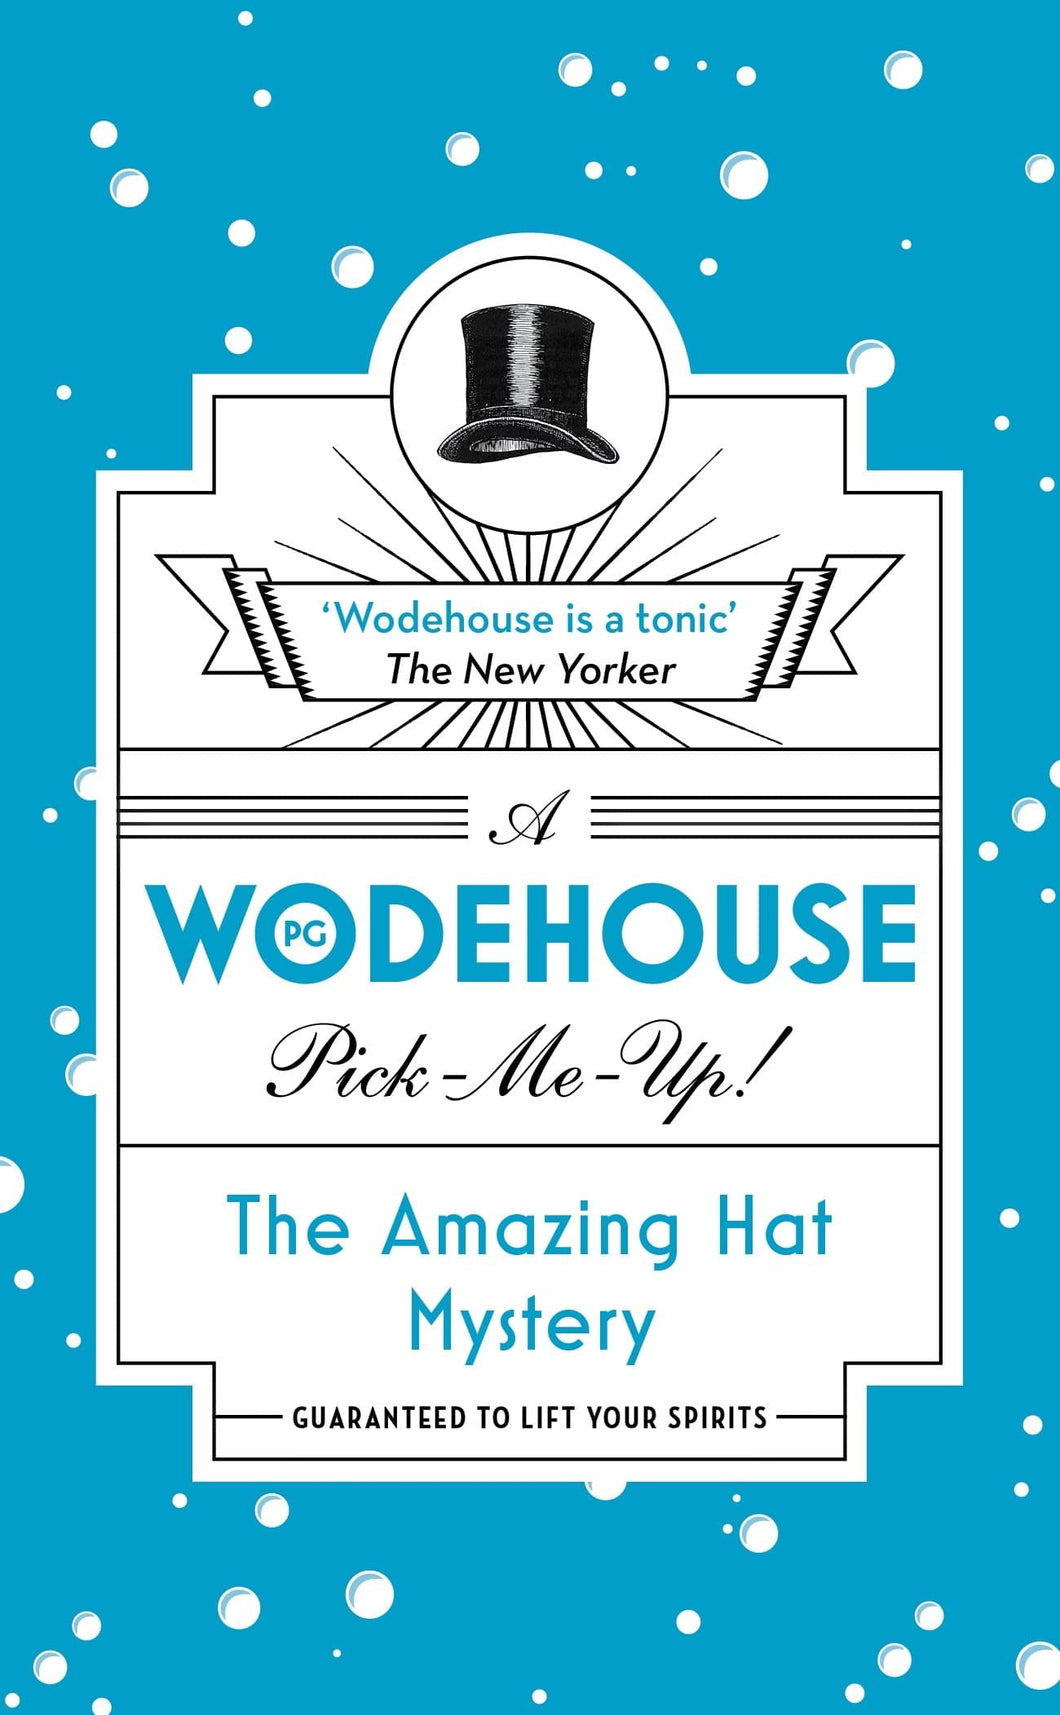 A Wodehouse Pick-Me-Up! -The Amazing Hat Mystery